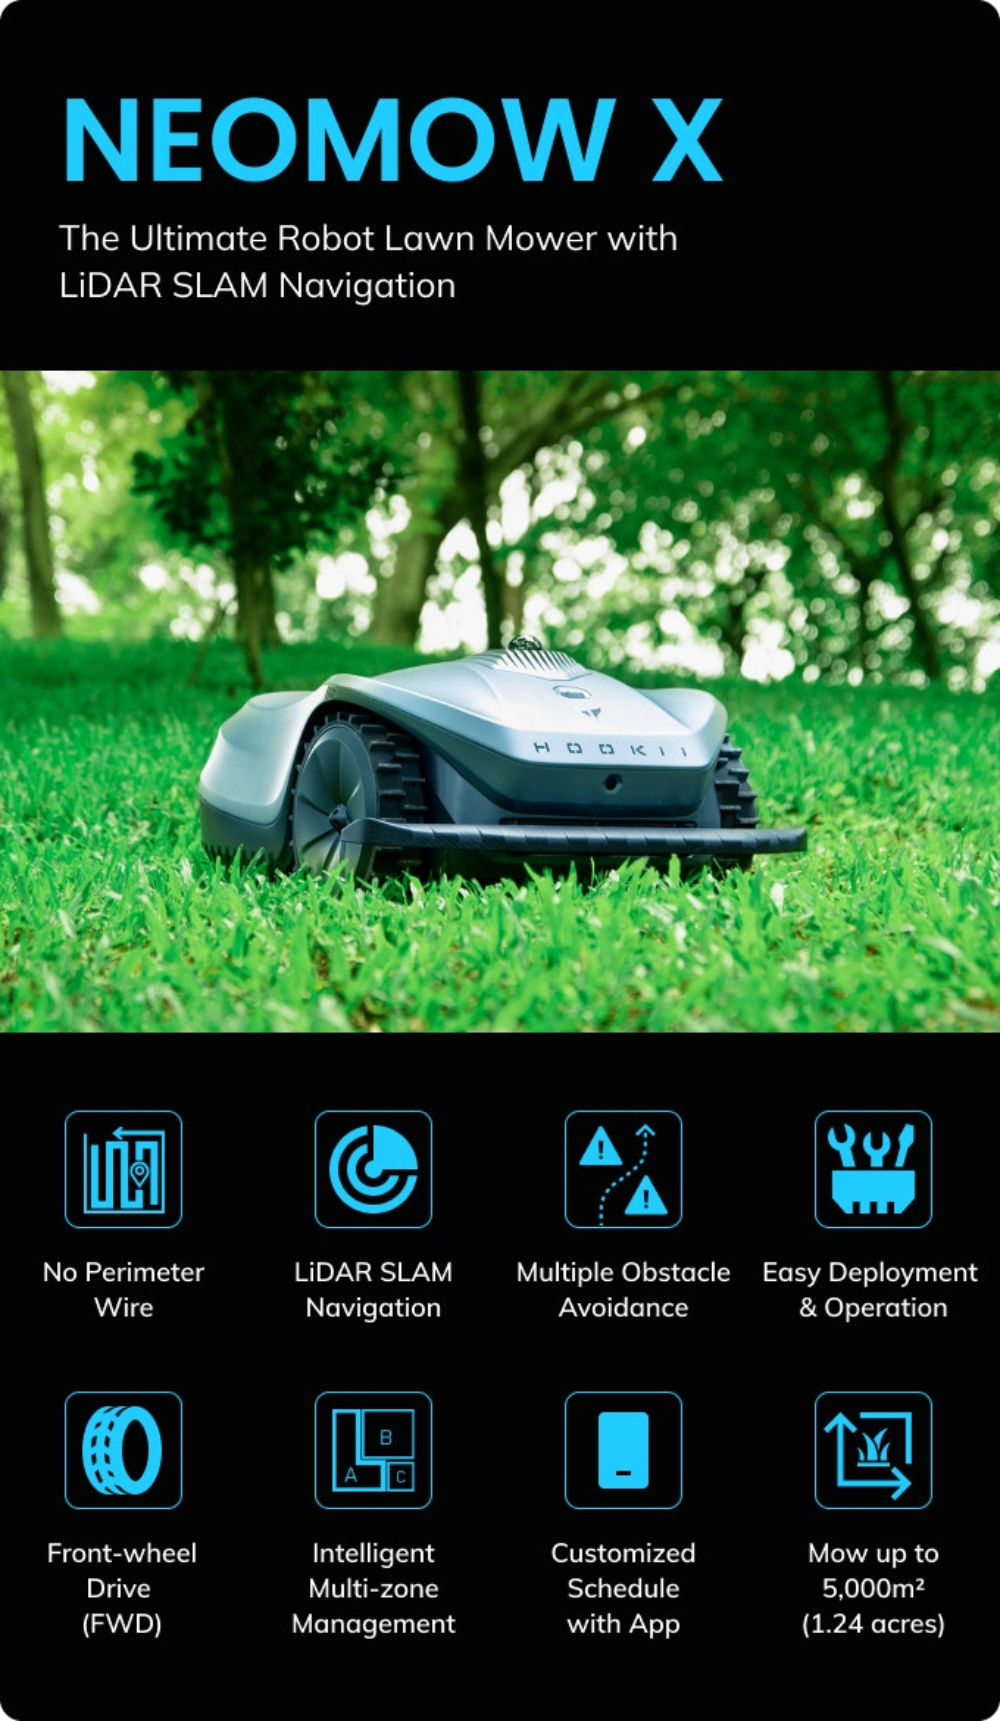 The Neomow X is a robot lawn mower with a LiDAR SLAM navigation system